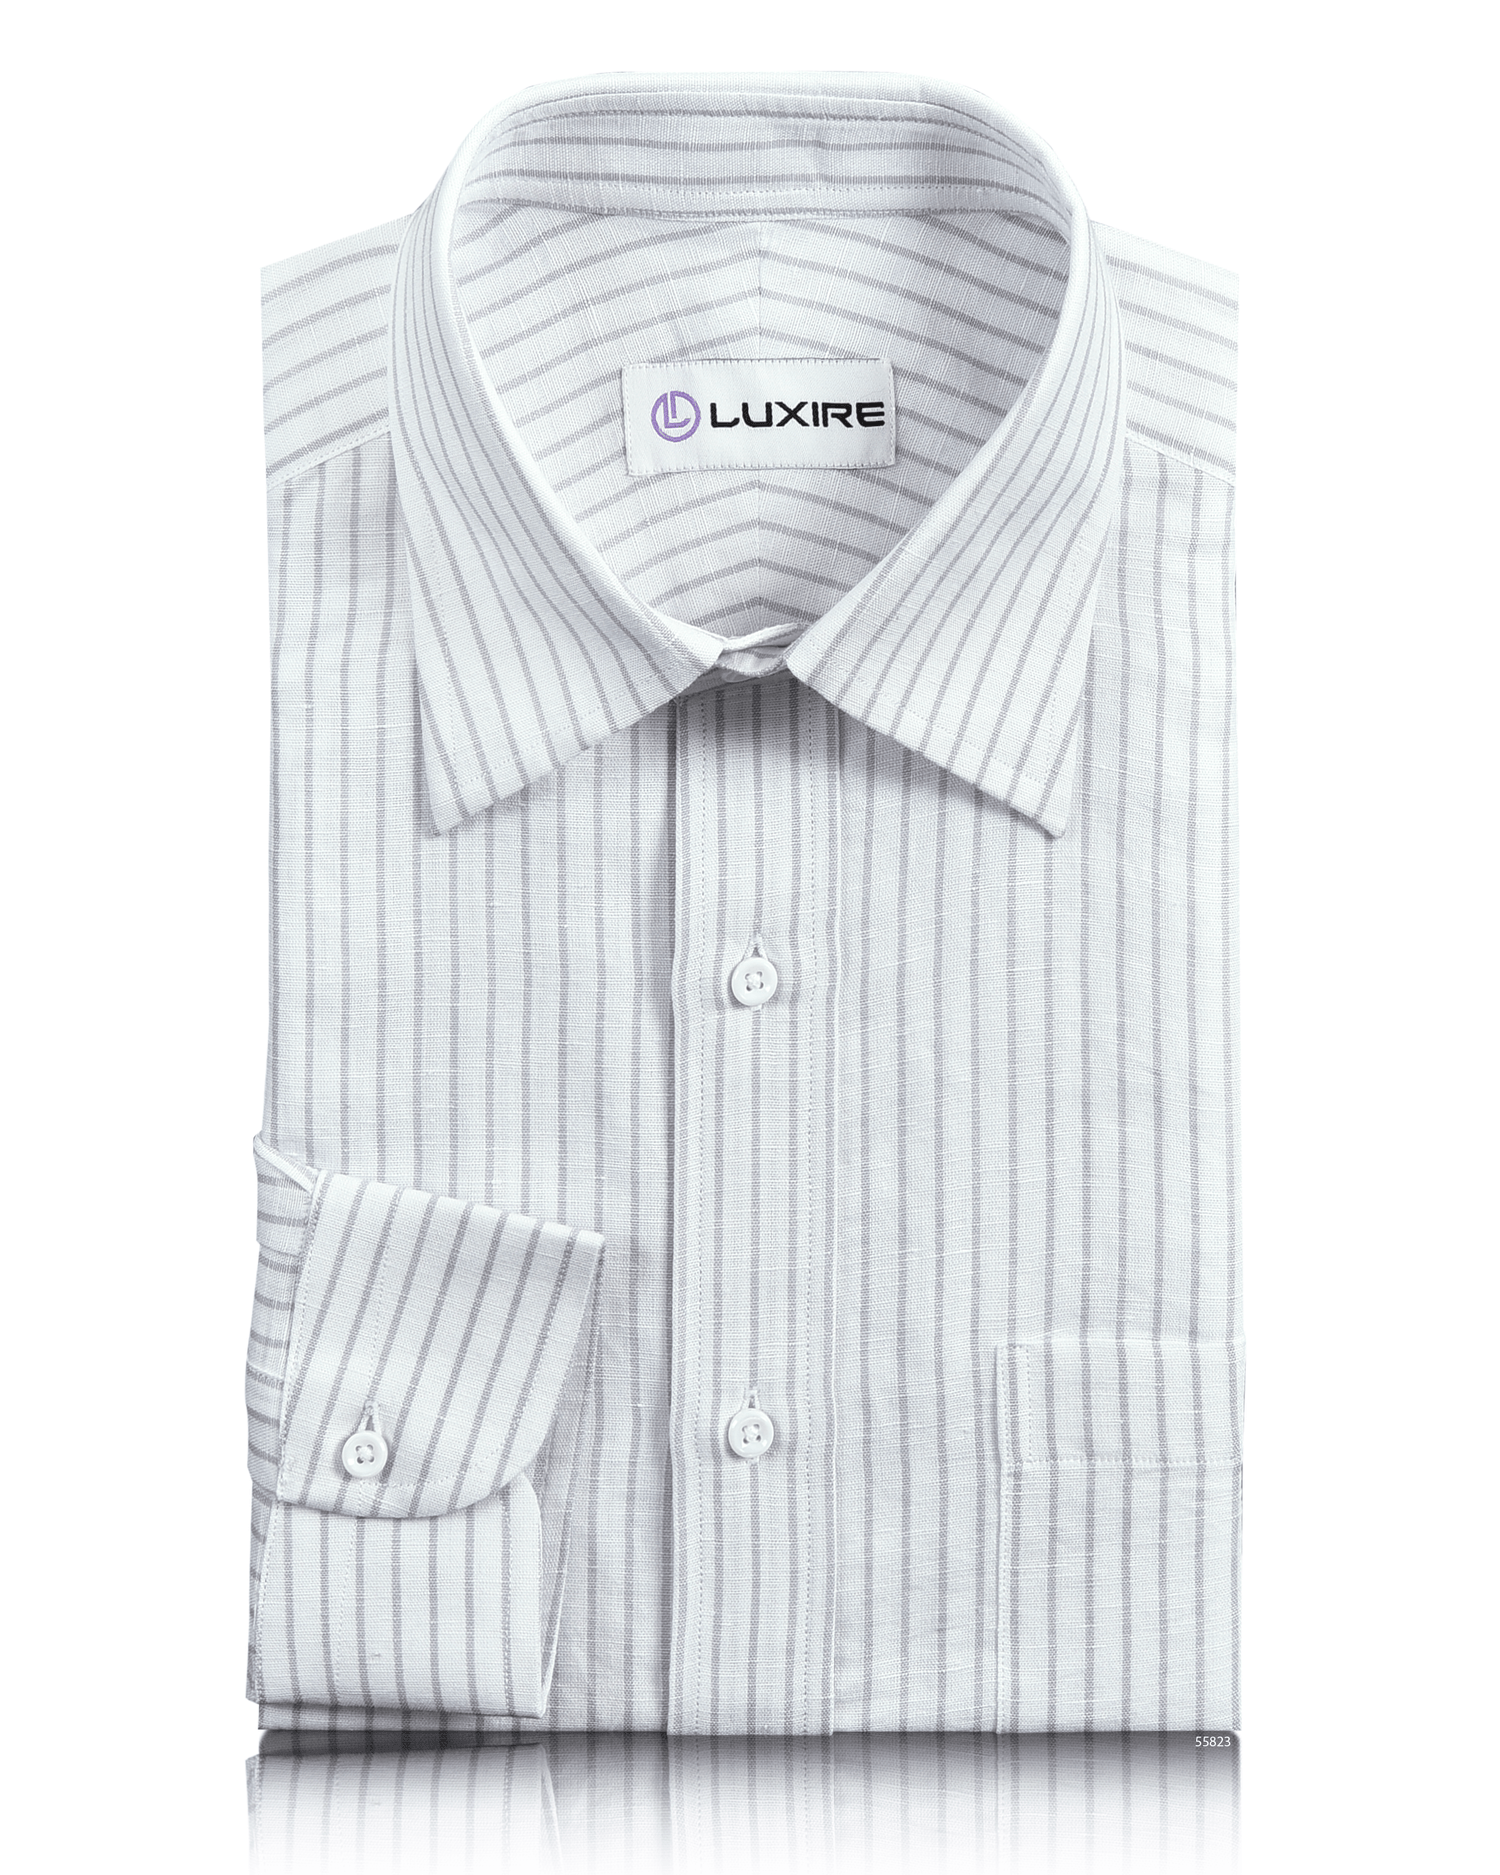 Front of the custom linen shirt for men in white with grey candy stripes by Luxire Clothing